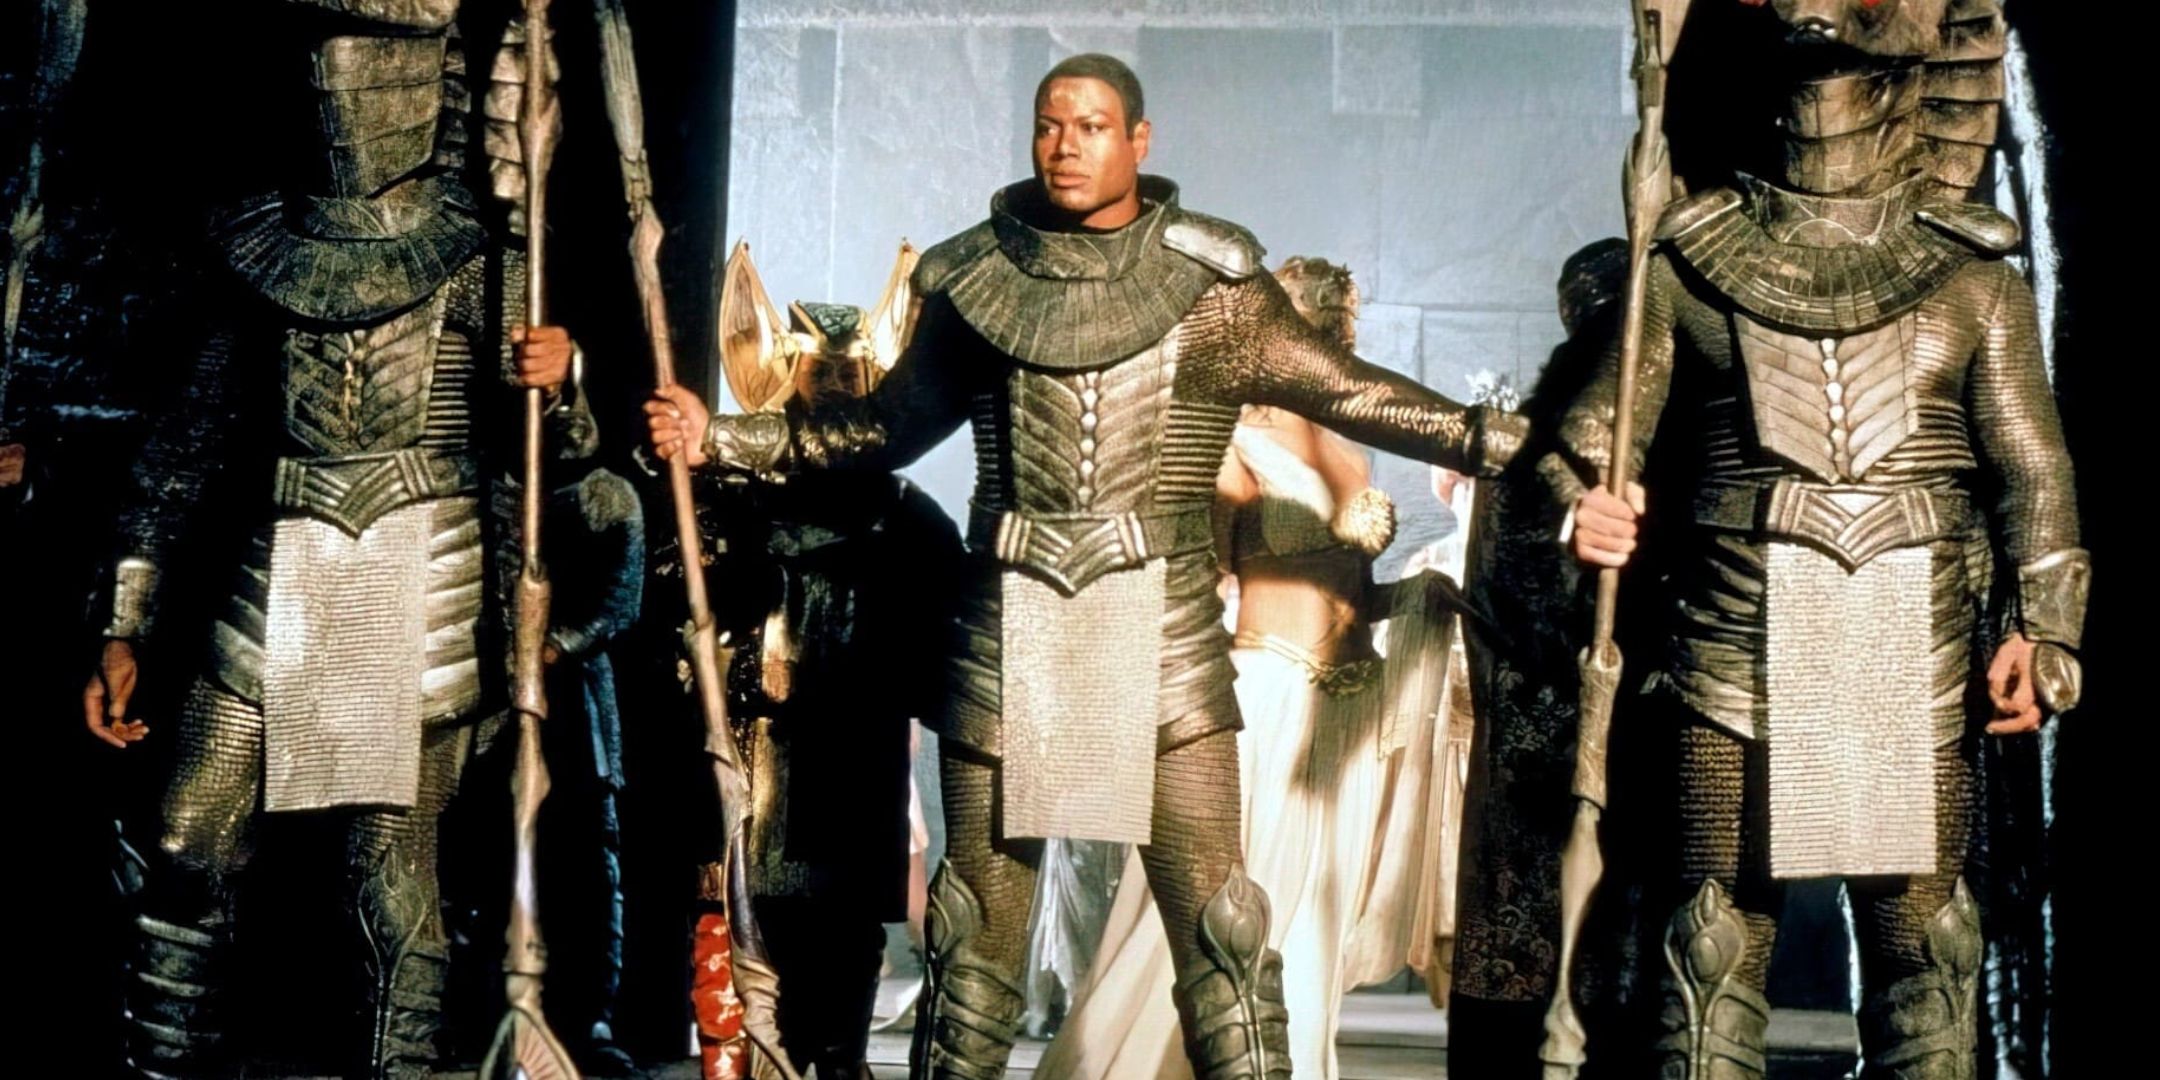 Stargate - Teal'c arriving with Apophis' guards